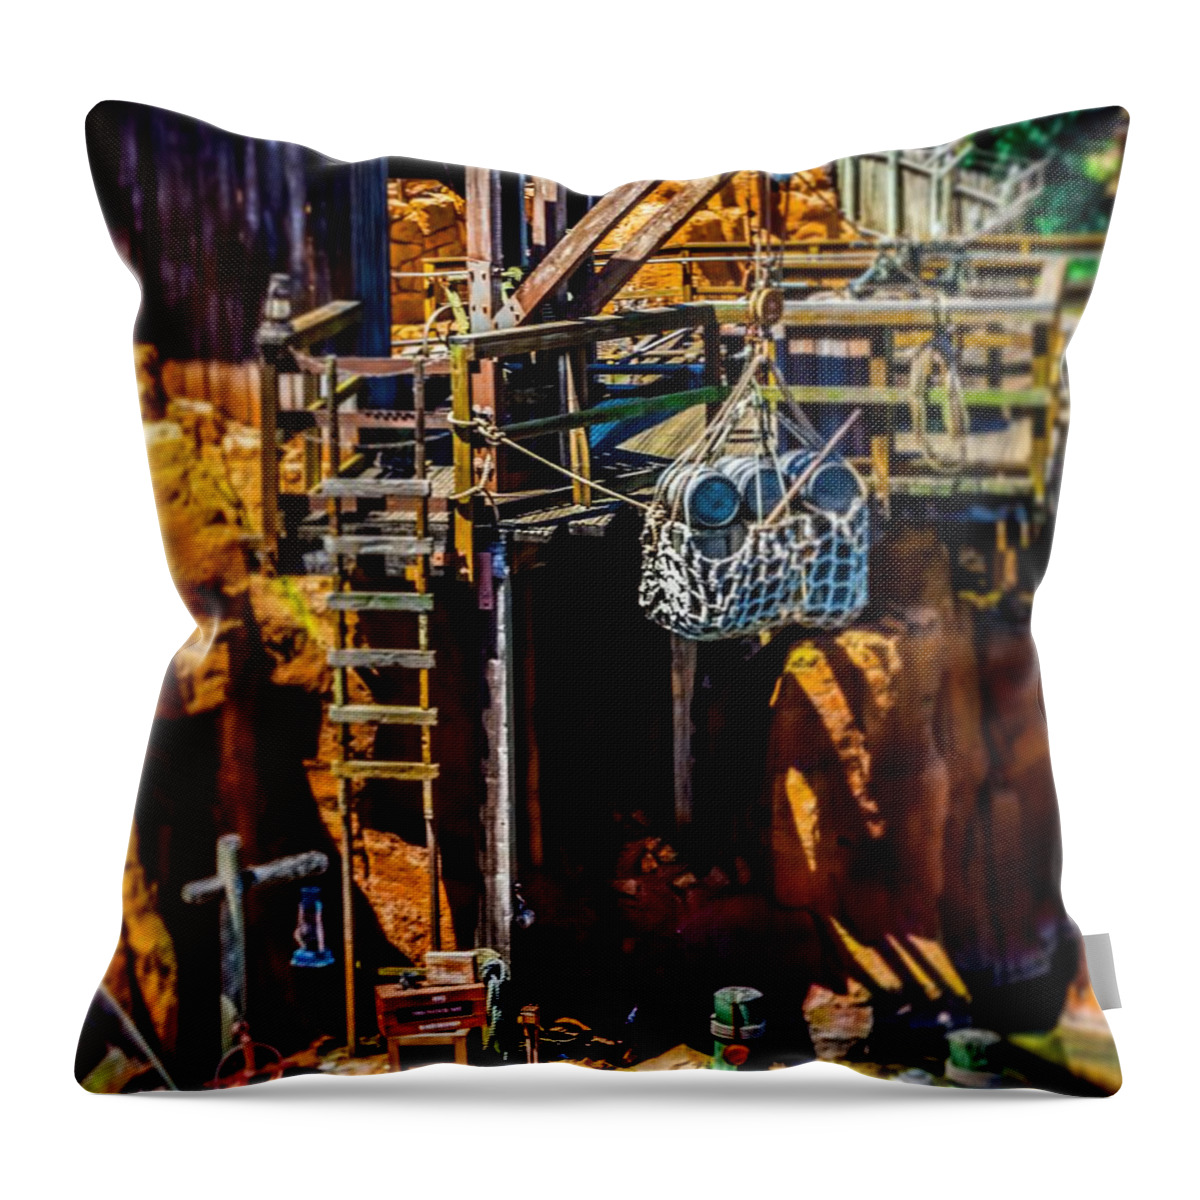  Throw Pillow featuring the photograph Loading Dock by Rodney Lee Williams